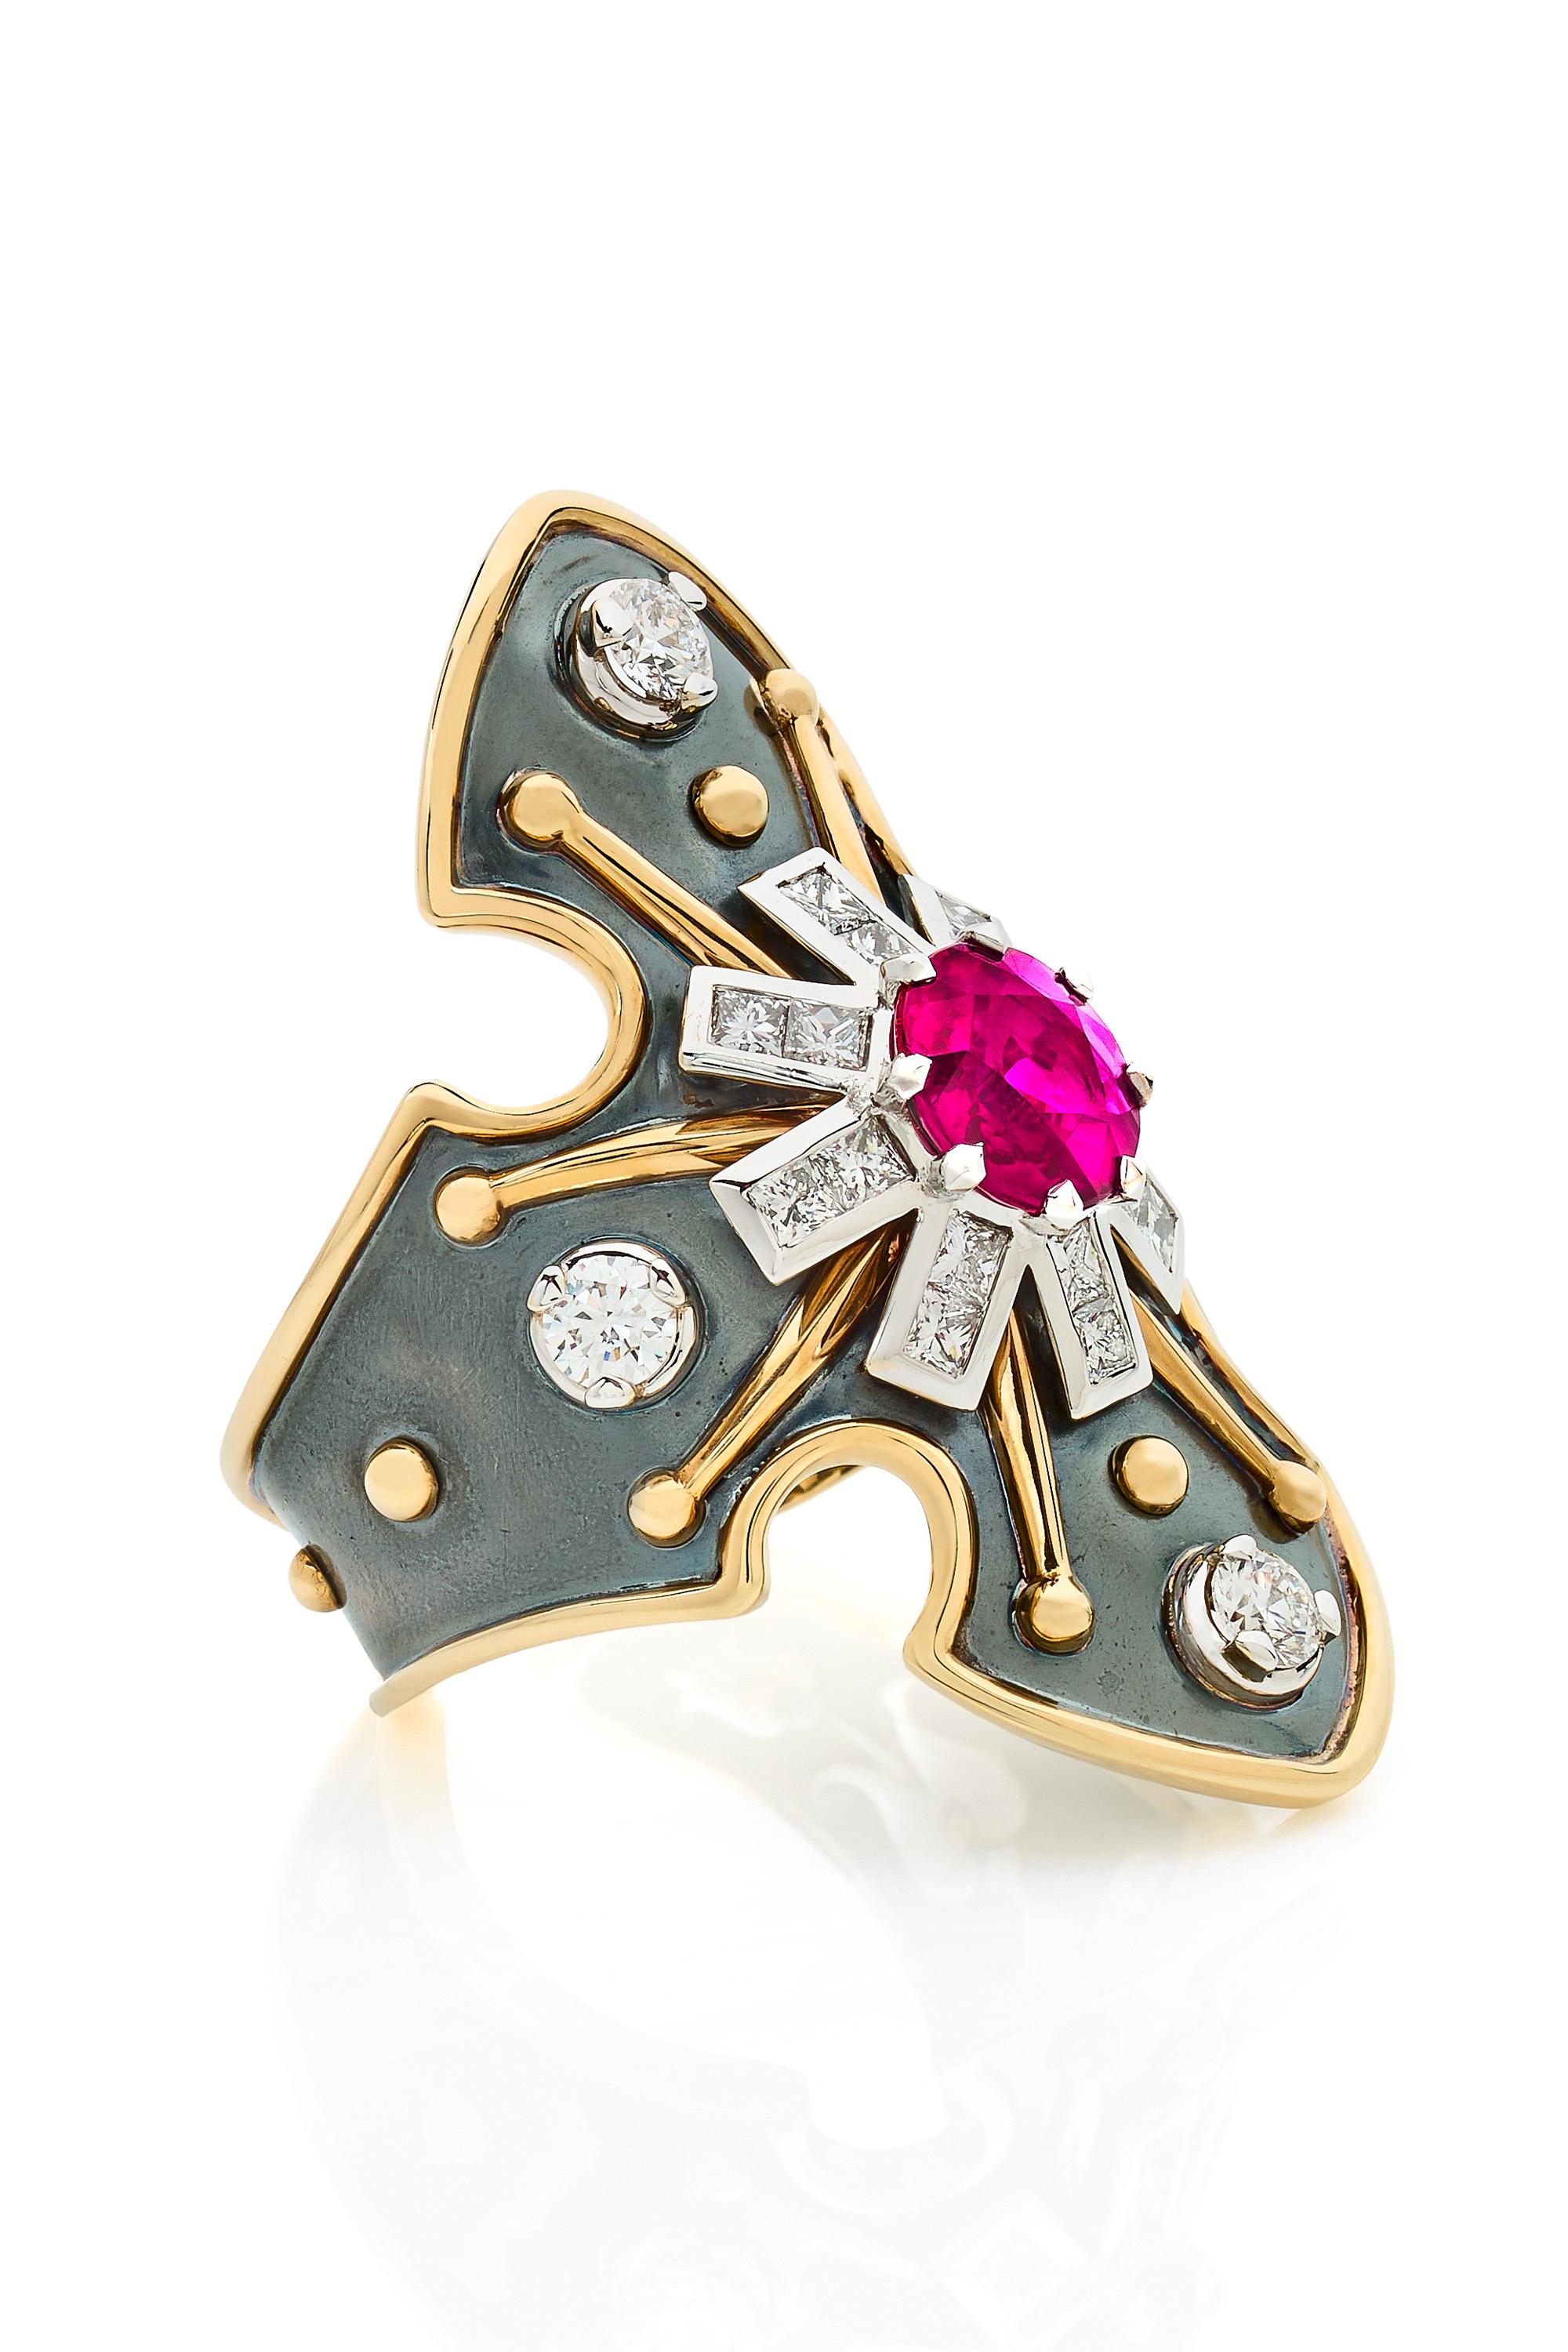 Yellow gold and distressed silver ring studded with a round burmese ruby surrounded by diamonds and set on a white gold star.

Details:
Round Burmese Ruby: 1.26 cts
Diamonds: 0.94 cts
18k Yellow Gold: 5.64 g
Distressed Silver: 5.74 g
Made in France